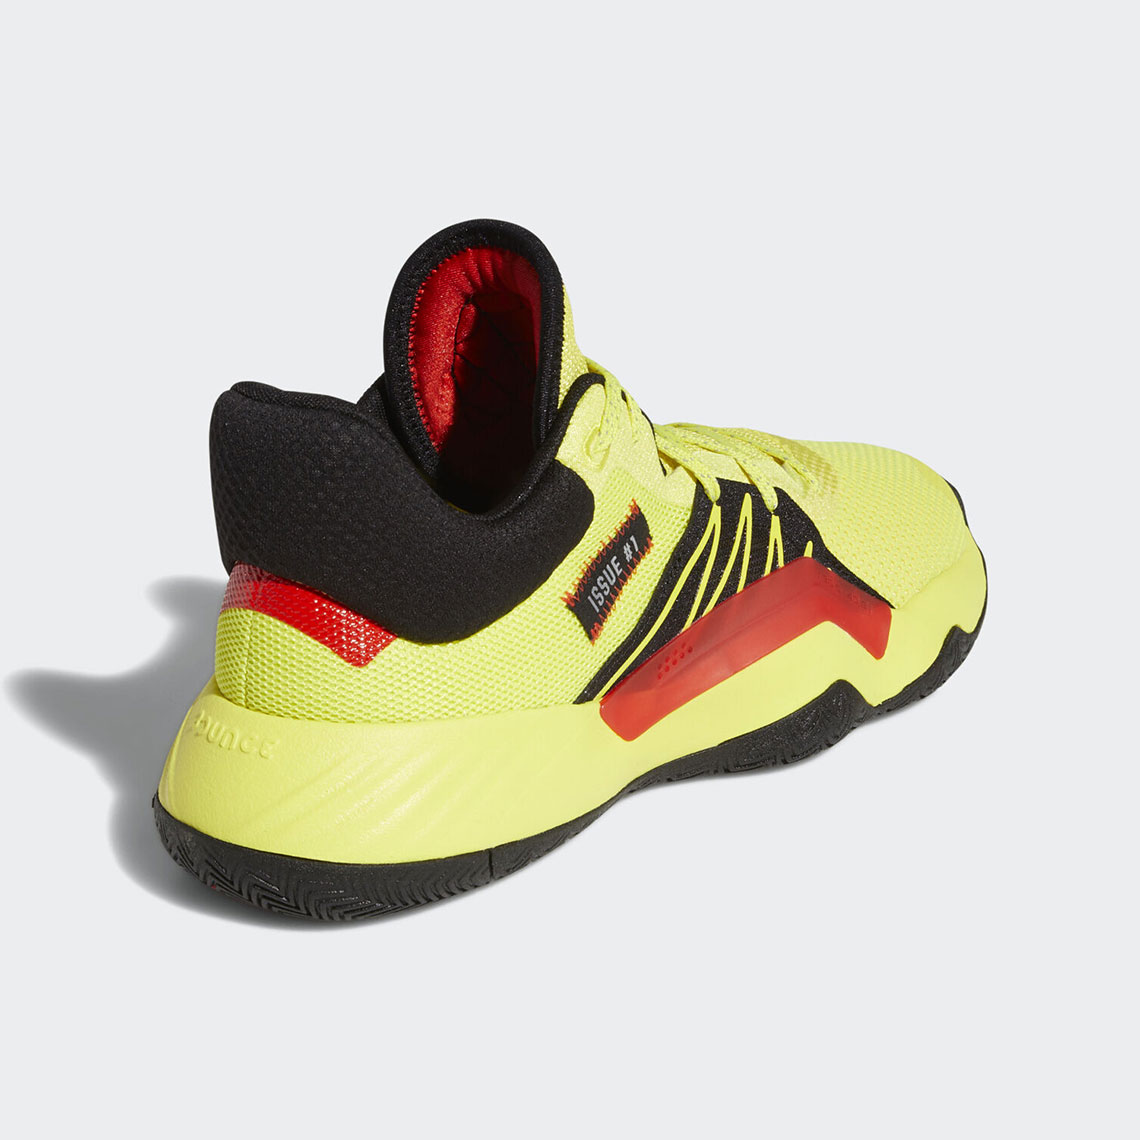 Adidas Don Issue 1 Shock Yellow Fire Truck 4